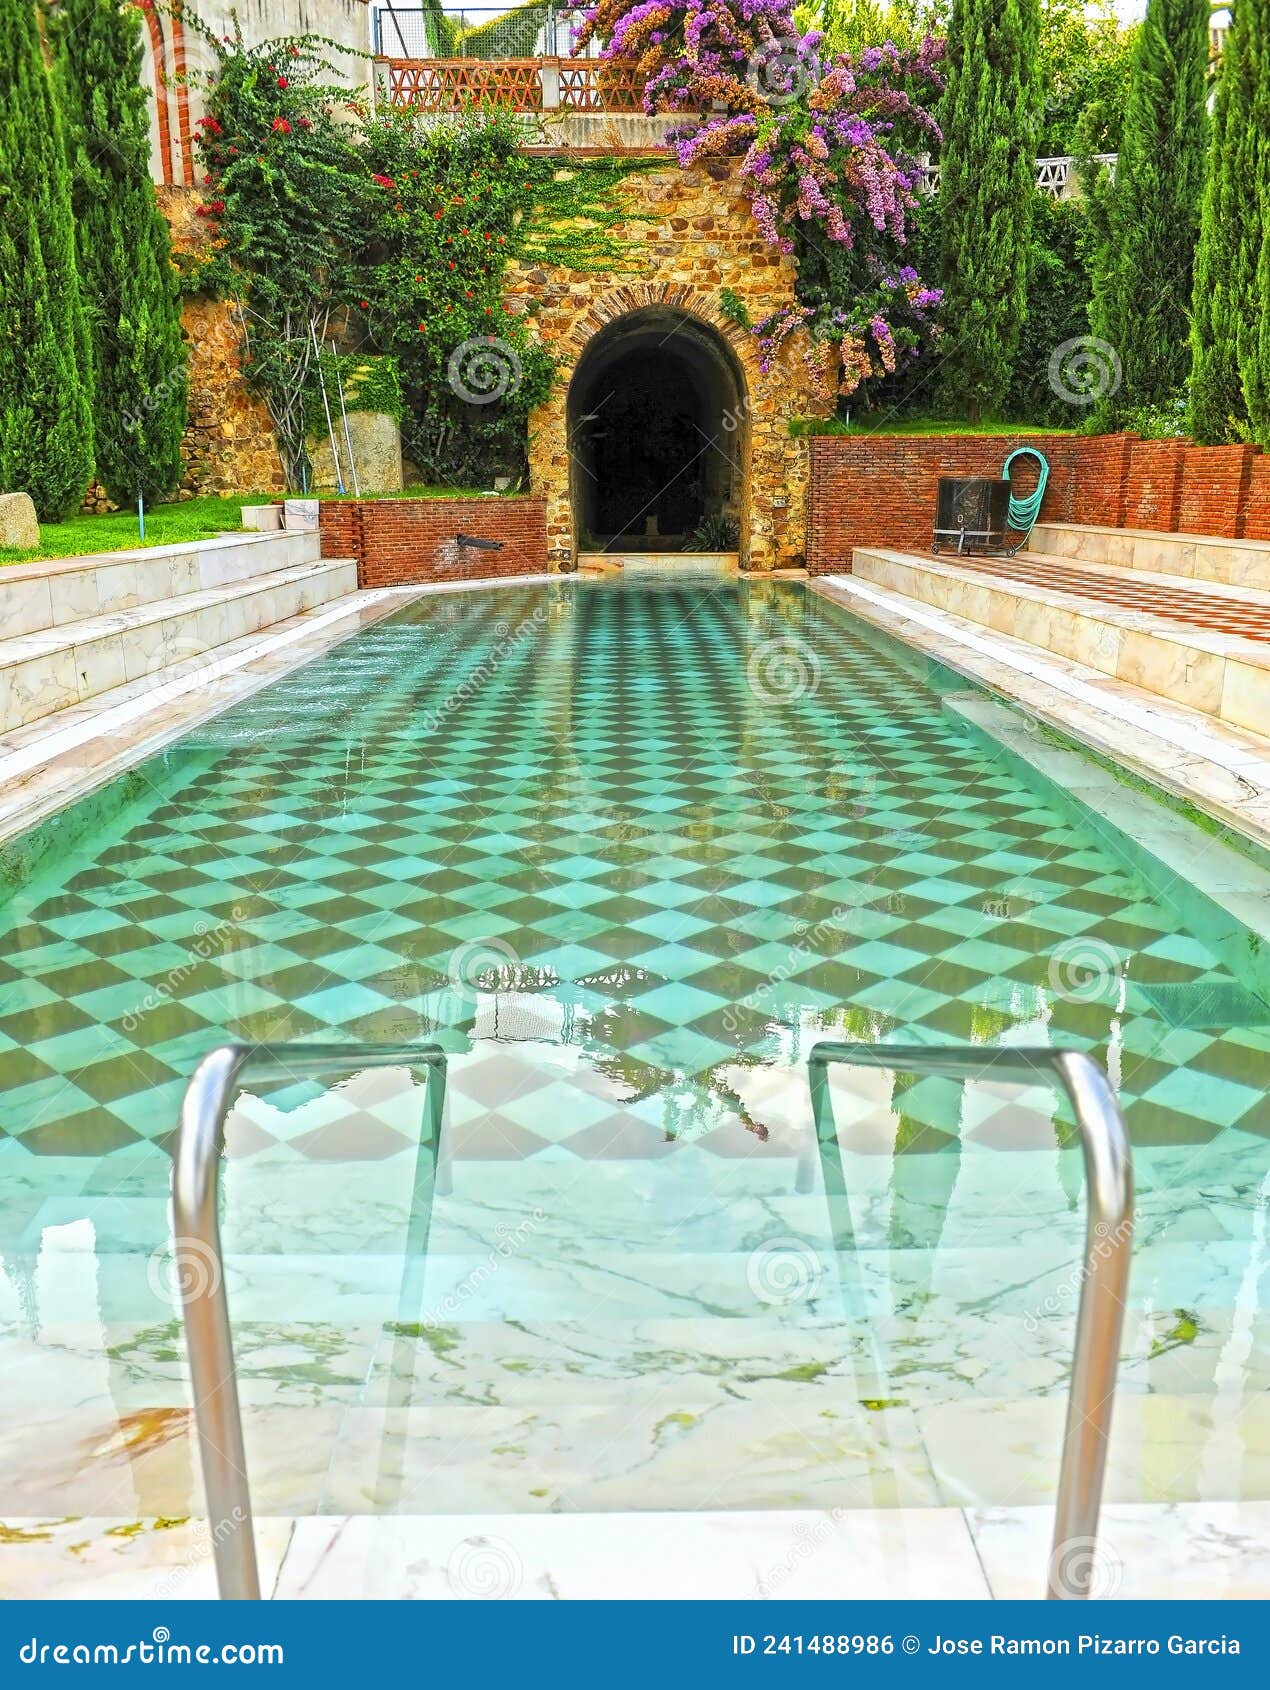 the outdoor pool of the spa of alange -balneario- famous thermal bath in the province of badajoz, spain